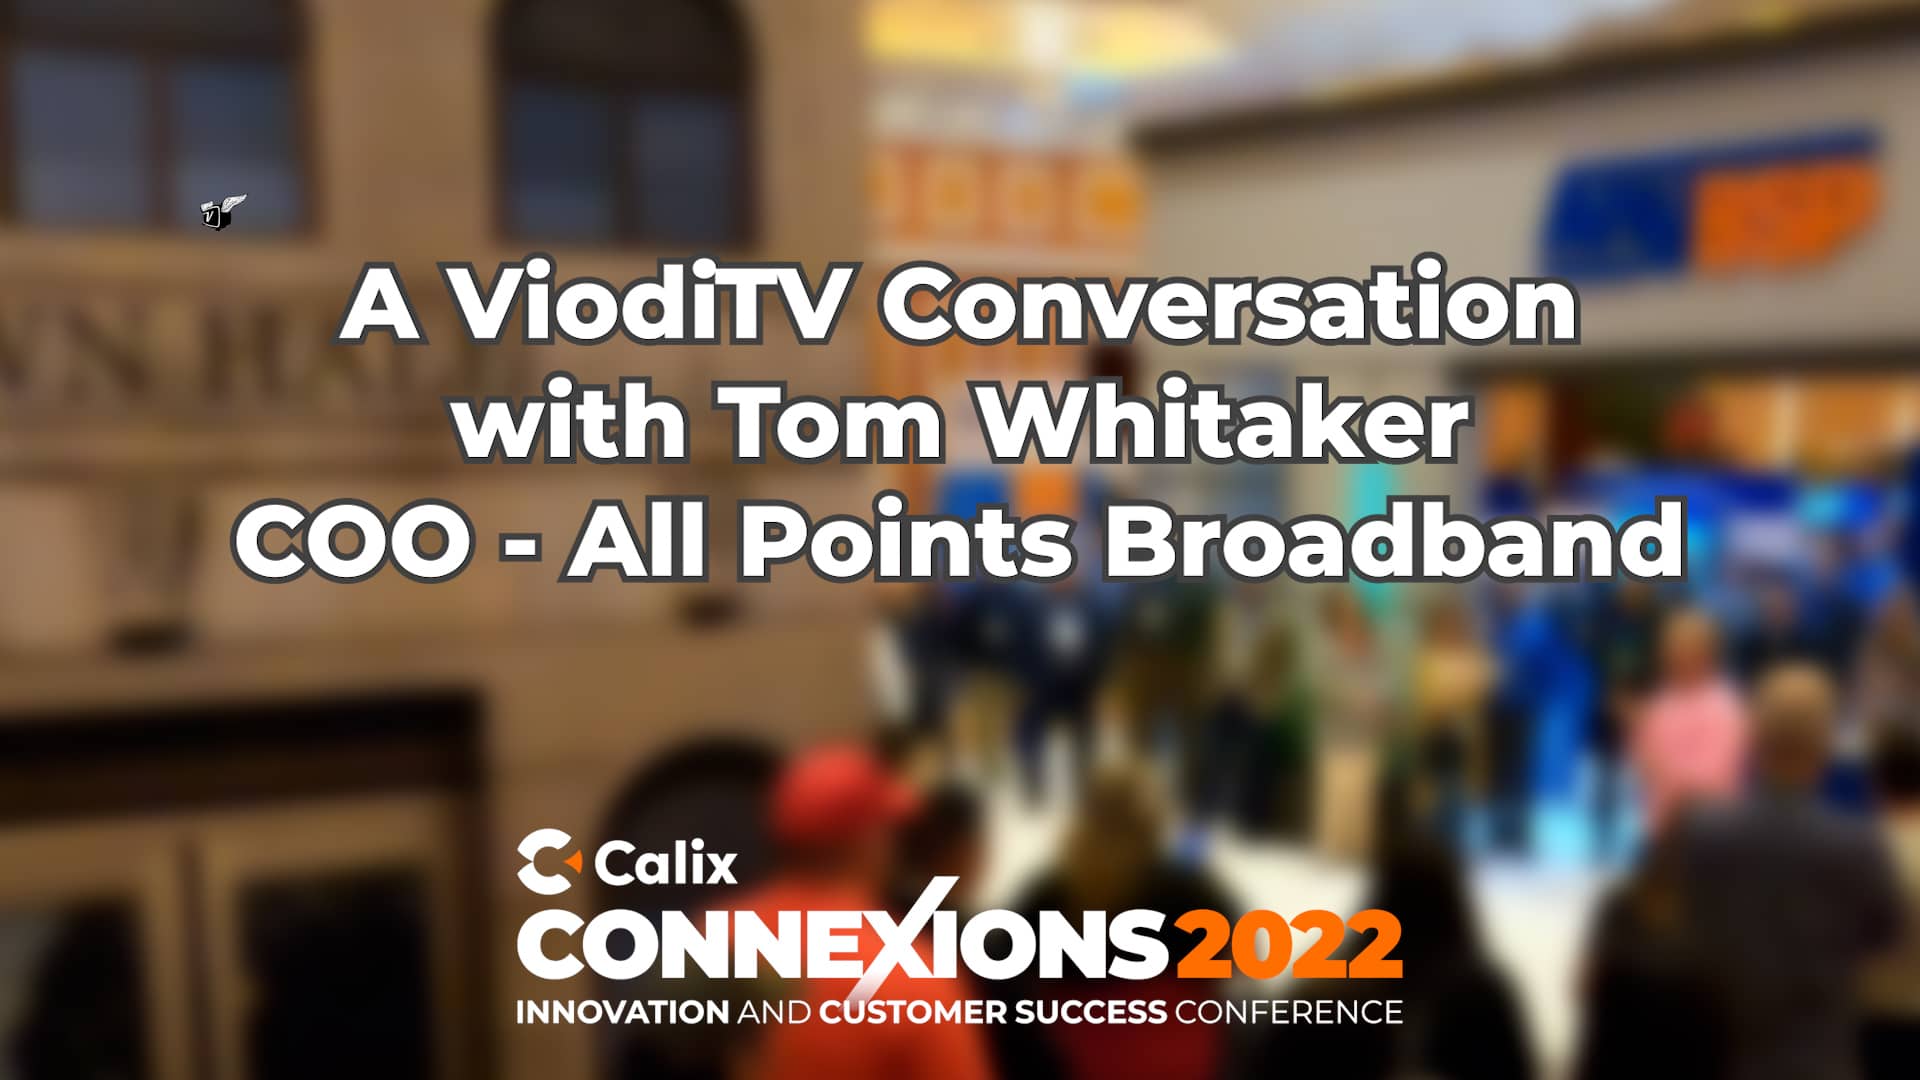 Interview with Tom Whitaker of All Points Broadband at ConneXions.